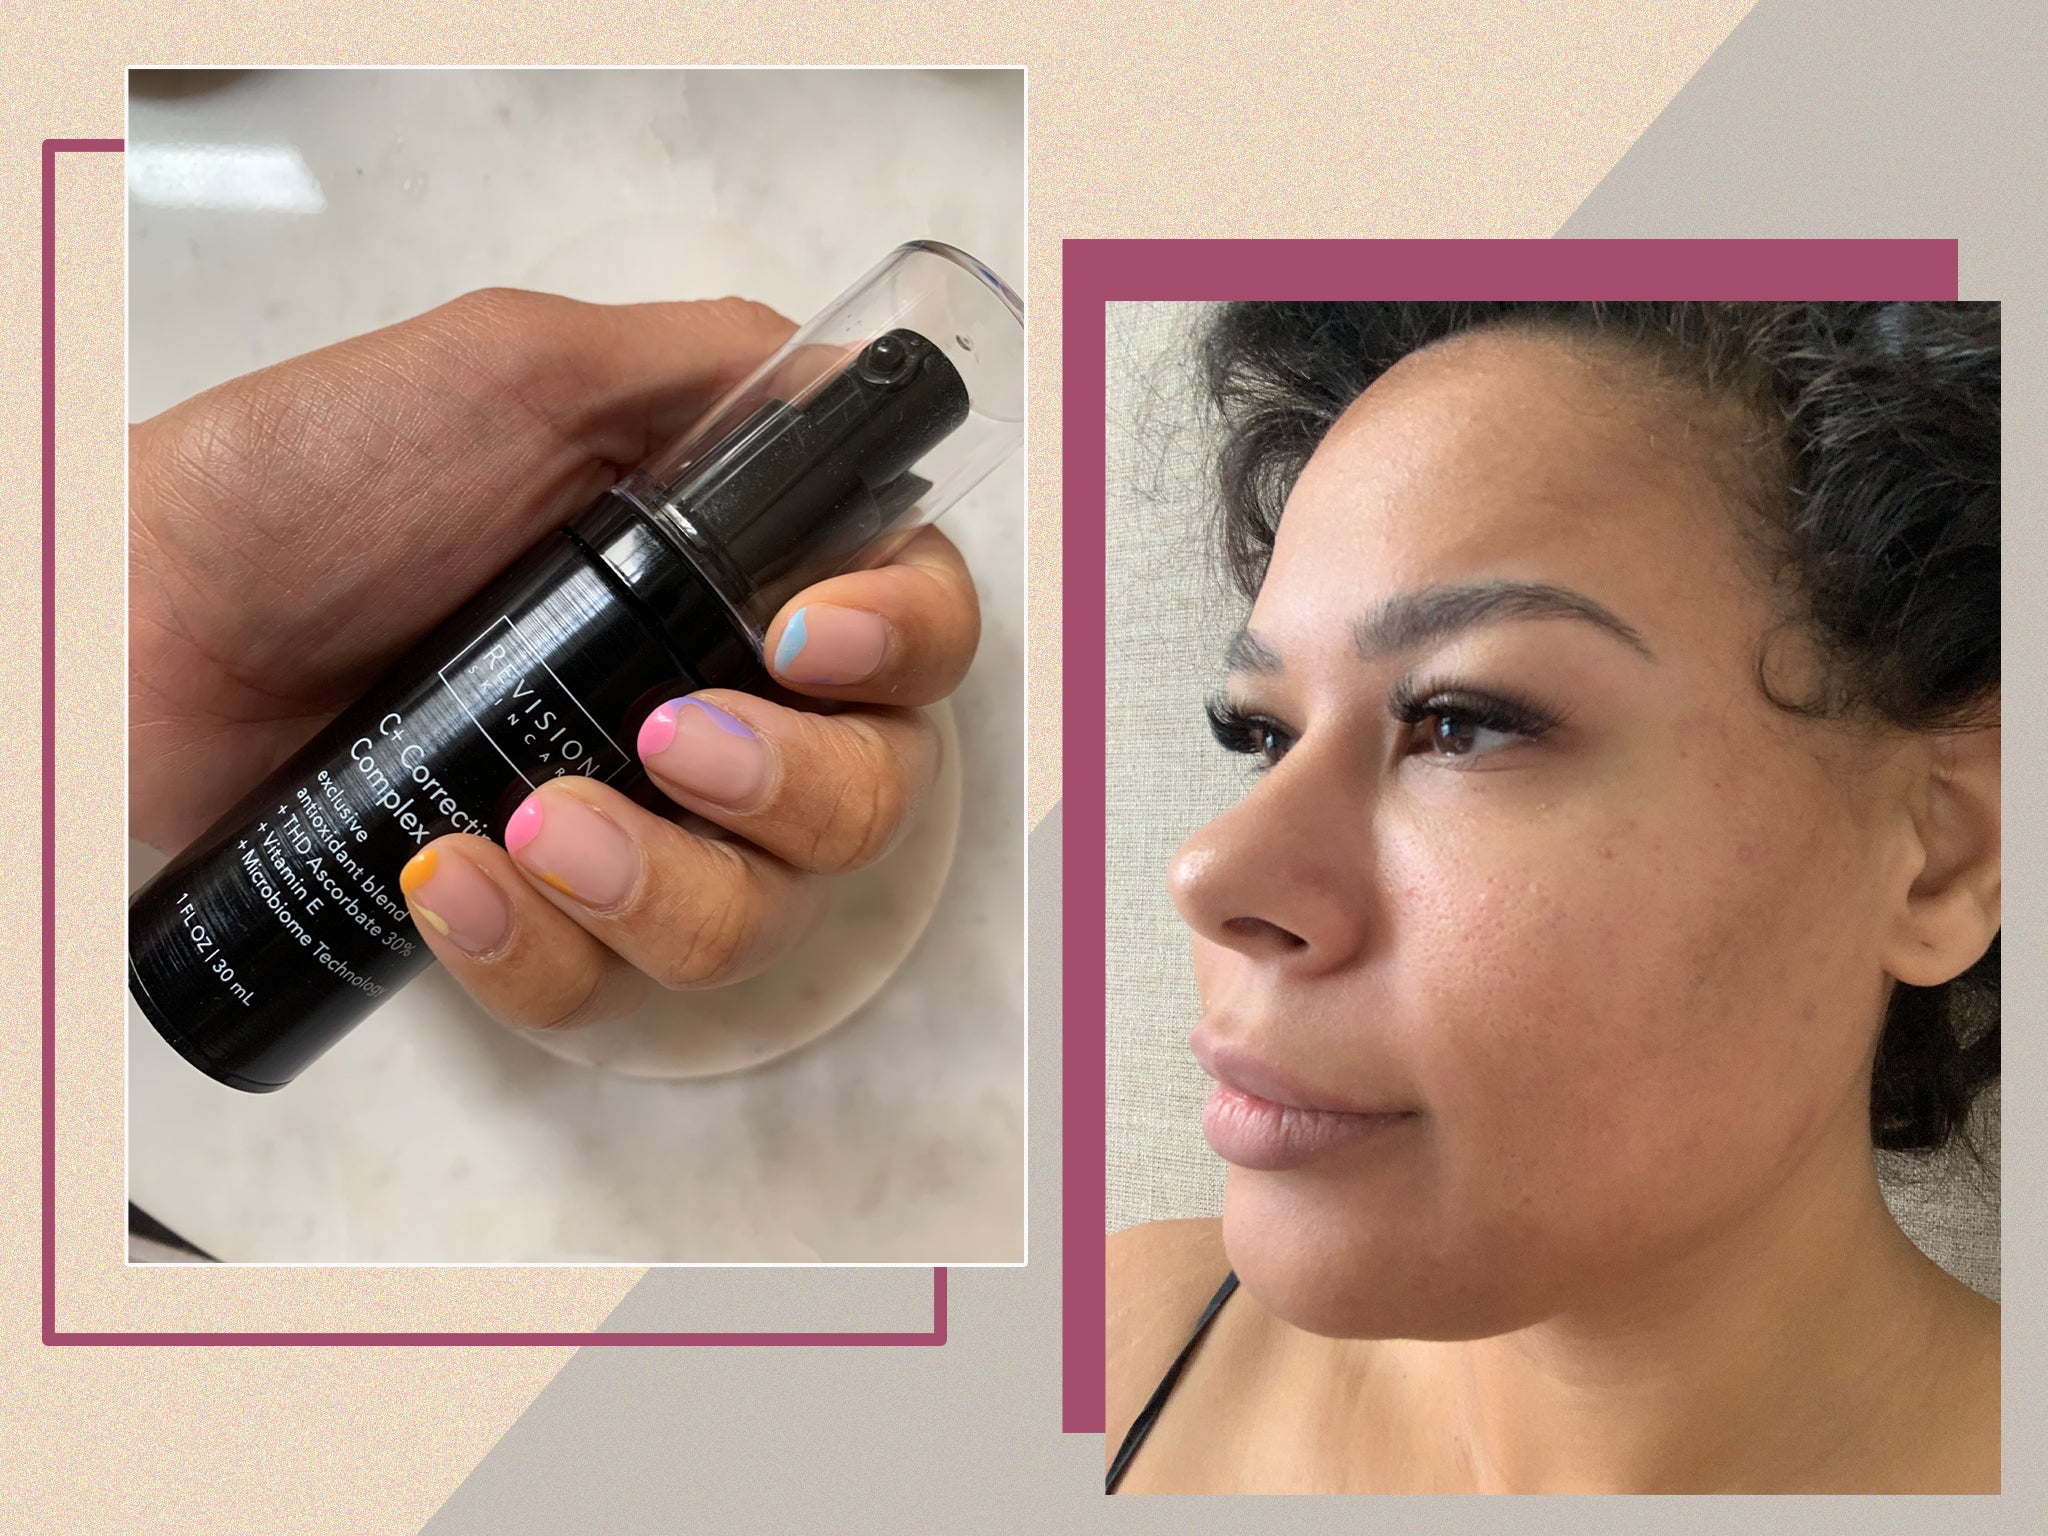 This vitamin C serum transformed my complexion – here’s why